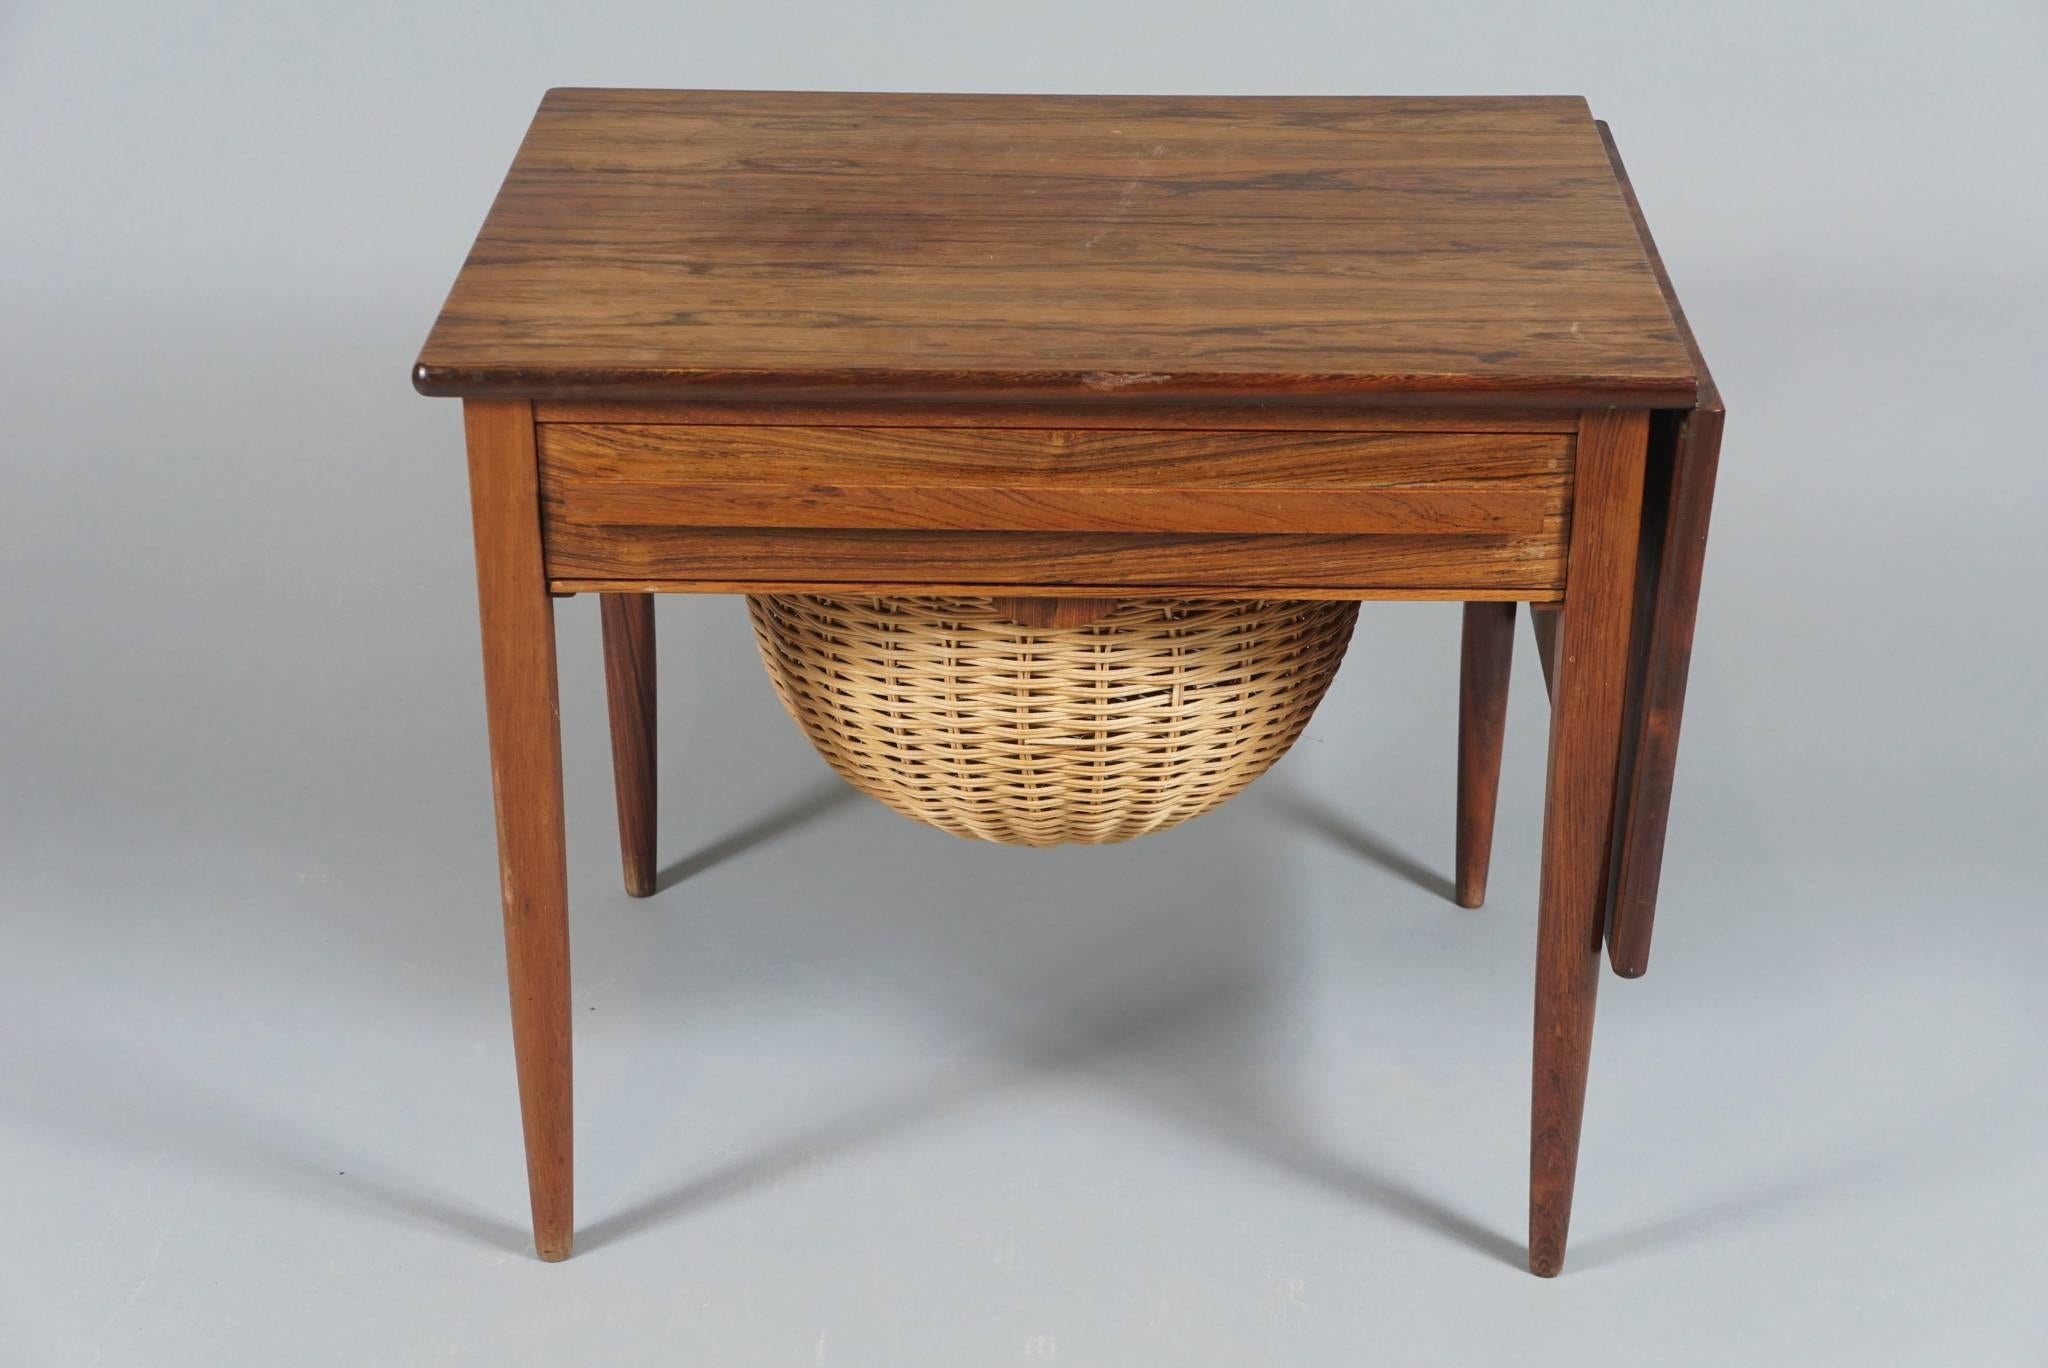 Unique Danish modern sewing table in finely figured rosewood, with sliding drop-leaf top, sewing article drawer and pull-out basket for wools, spools, etc. 
The table measures 36